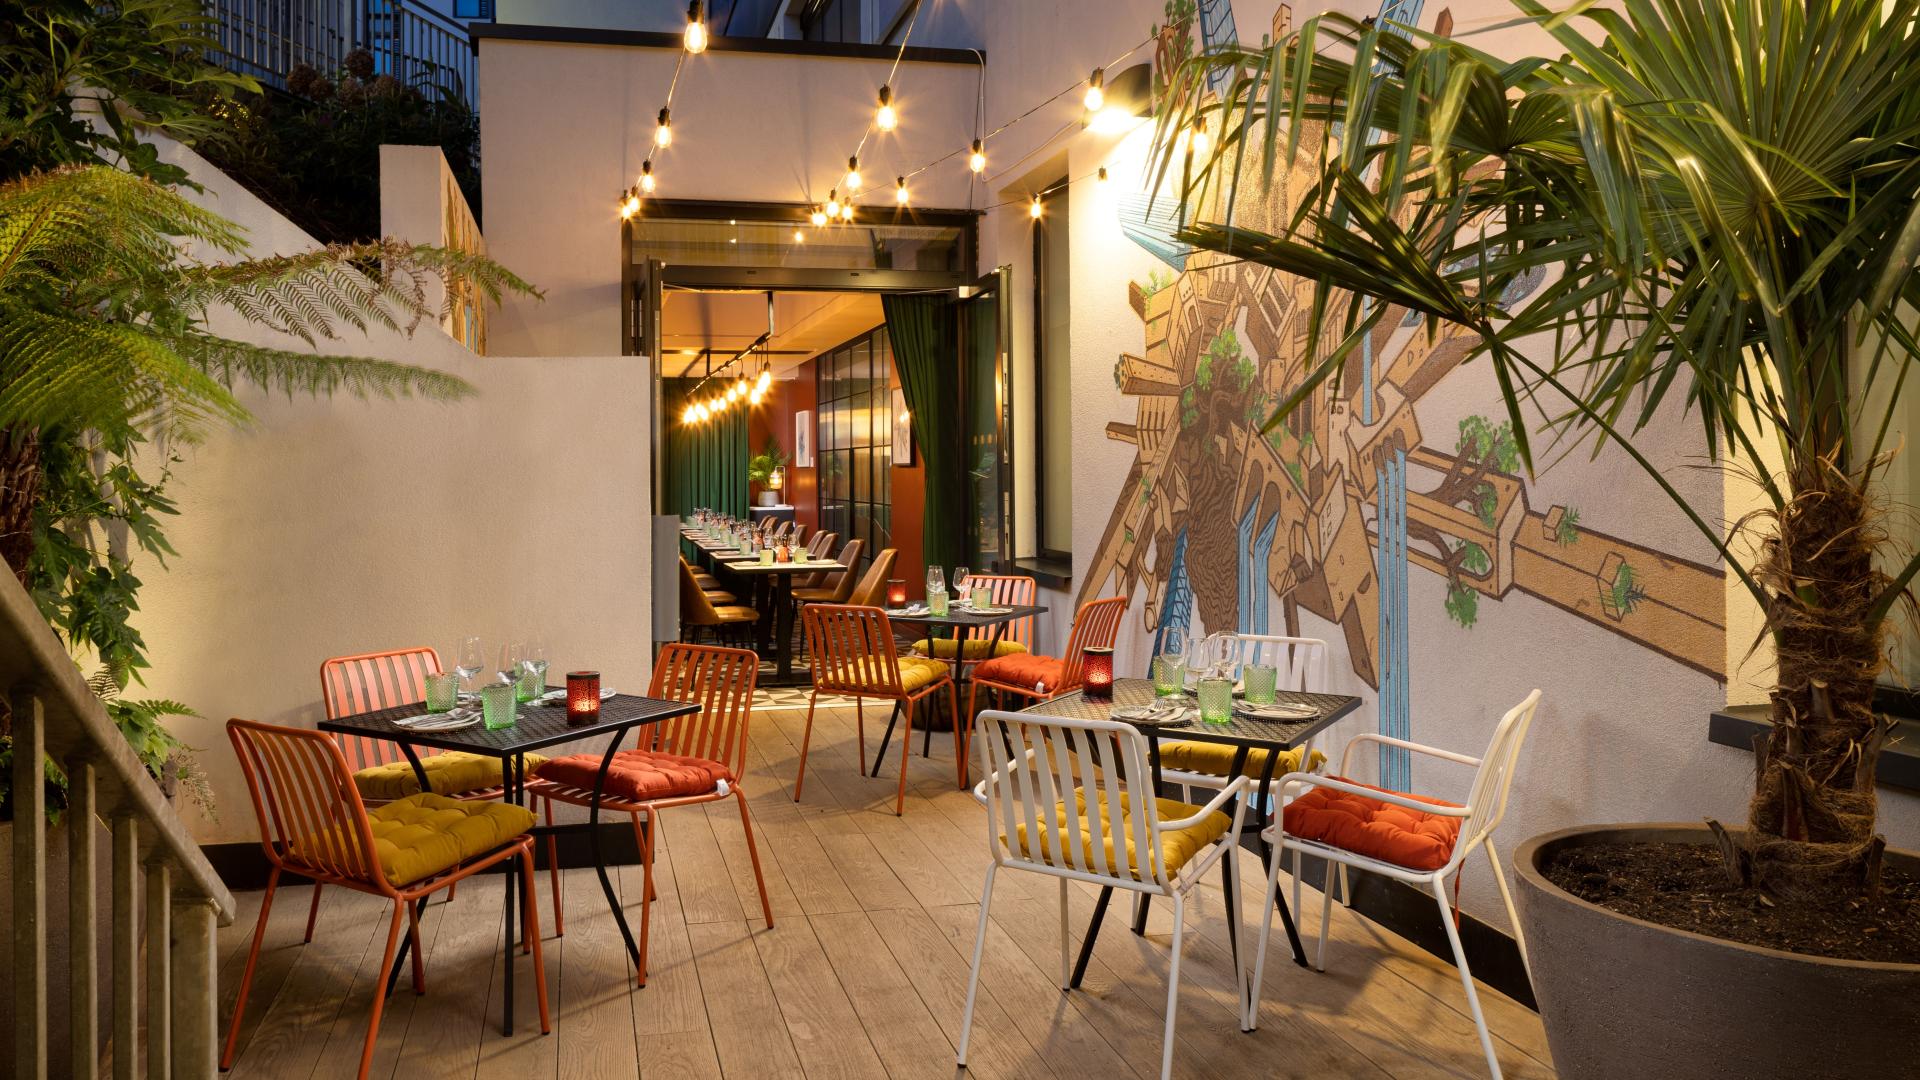 Party Restaurants for Hire in London